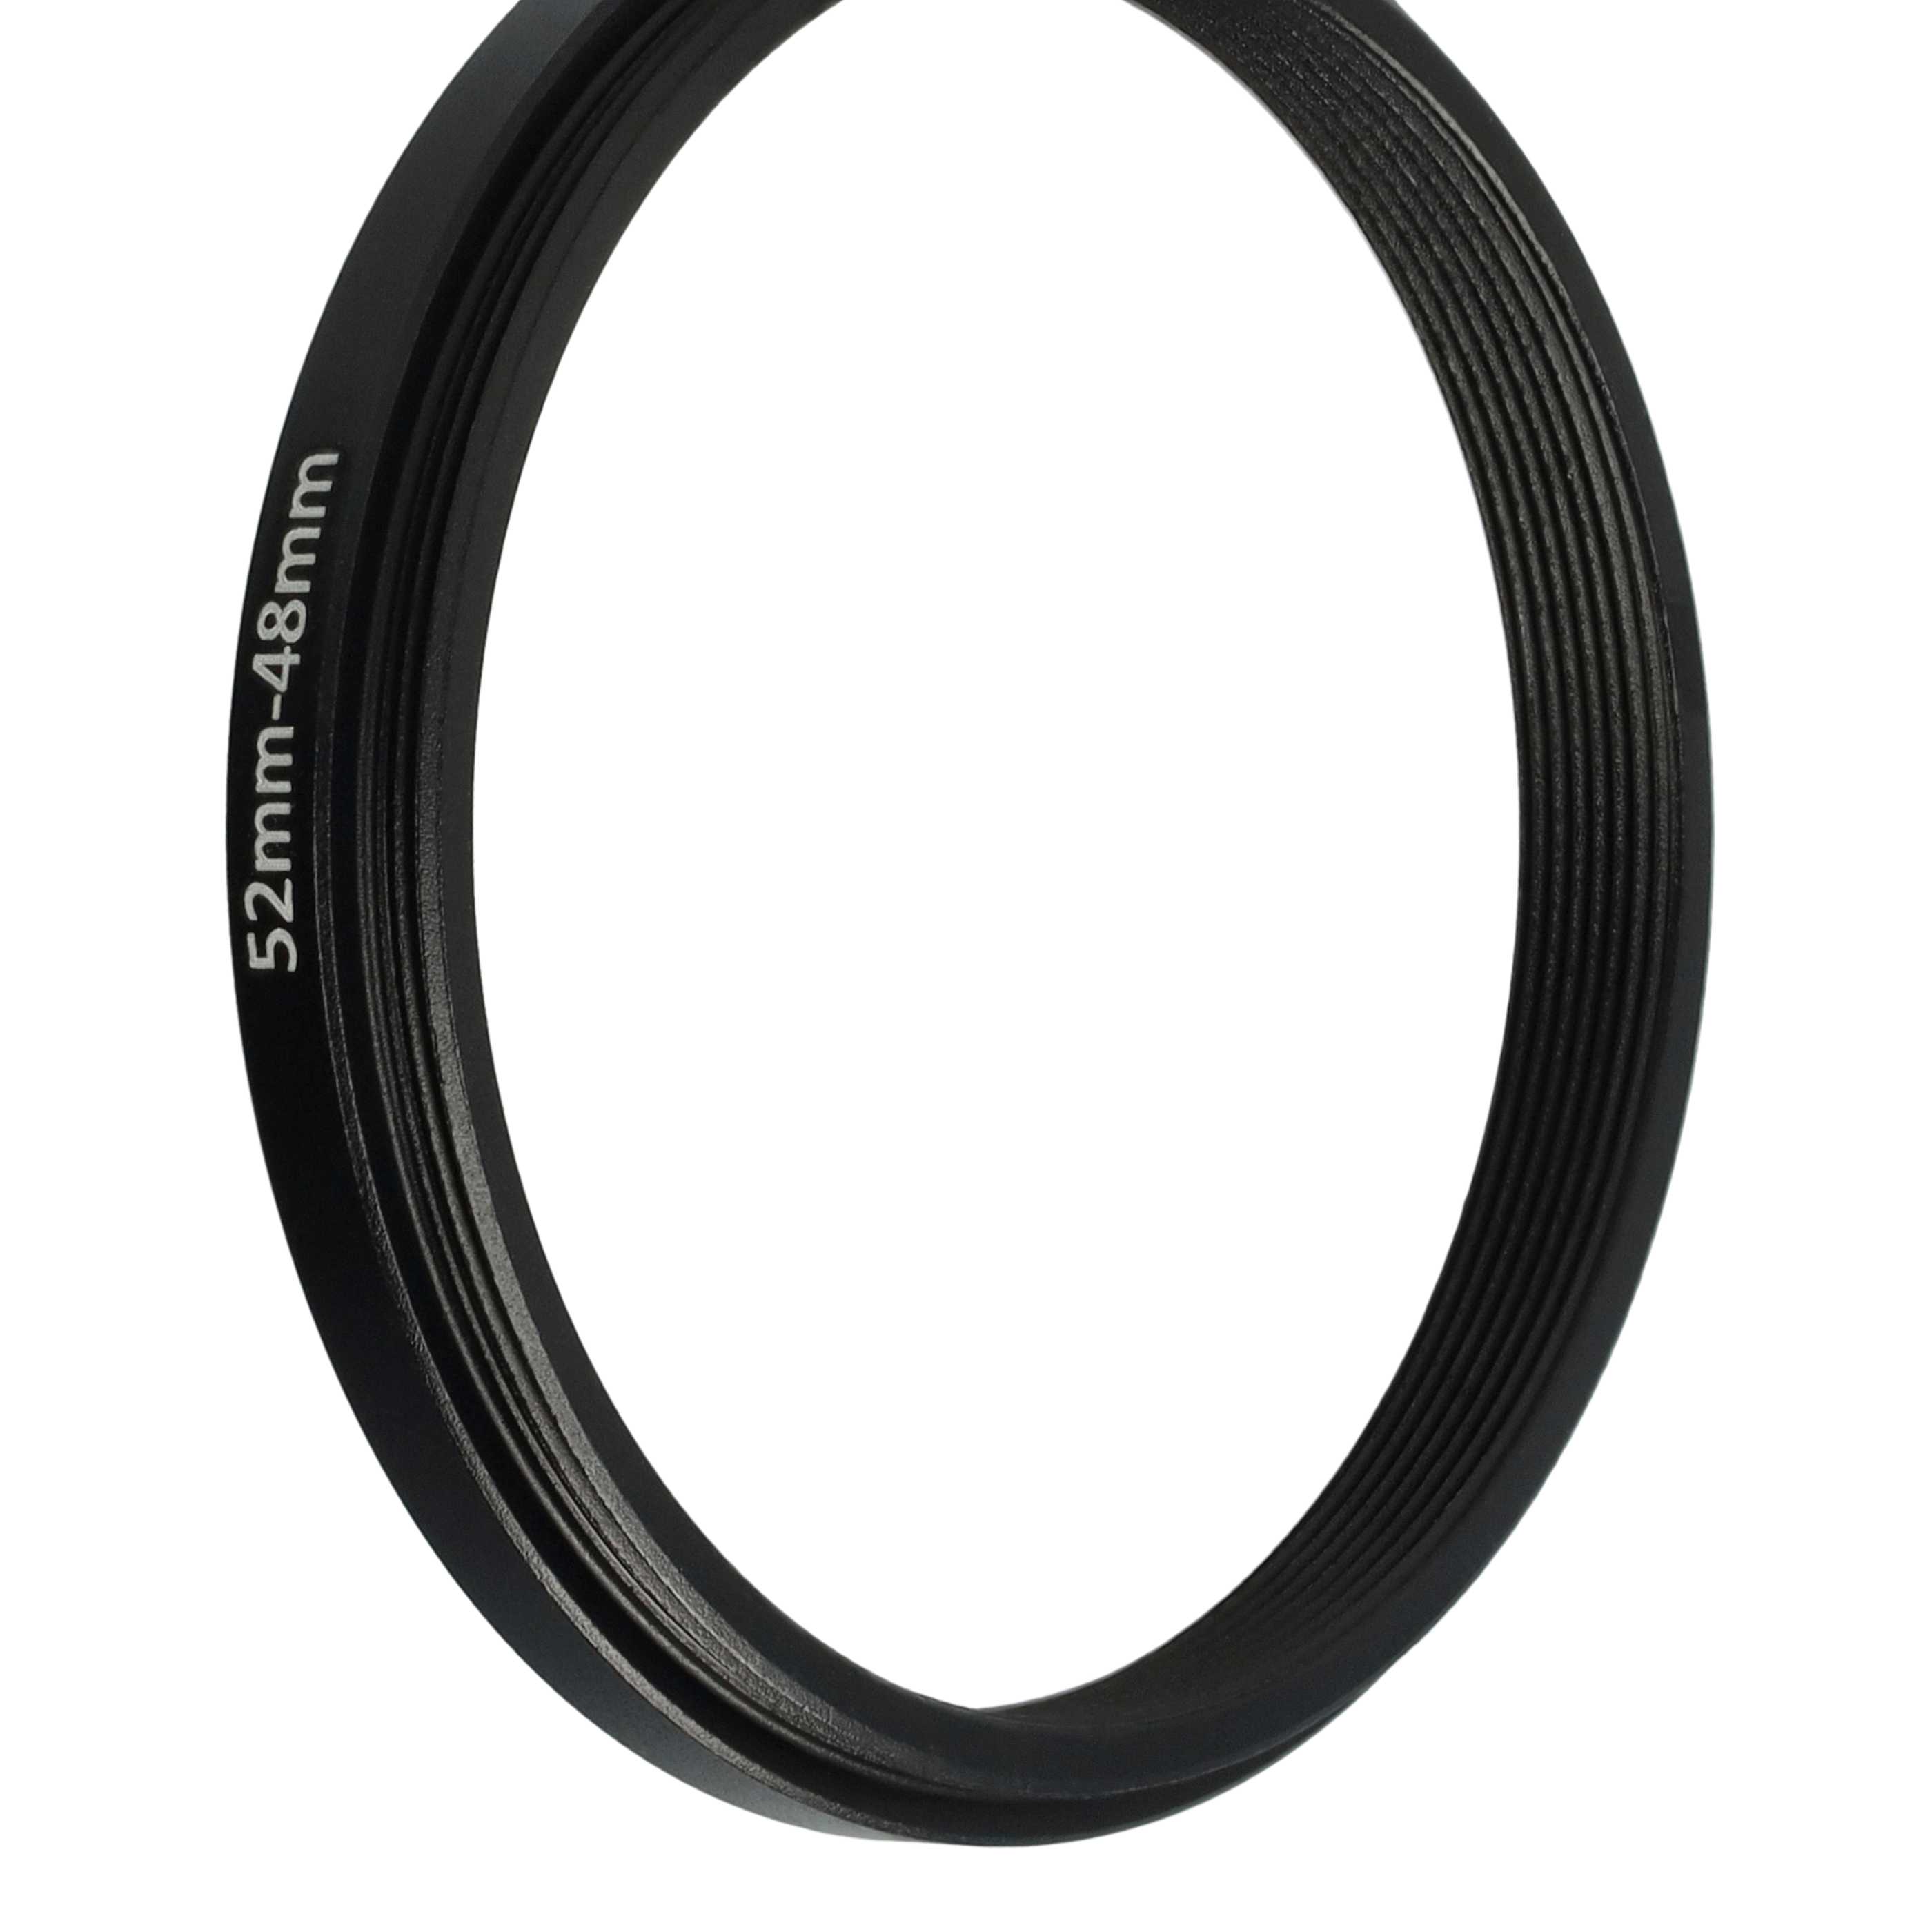 Step-Down Ring Adapter from 52 mm to 48 mm suitable for Camera Lens - Filter Adapter, metal